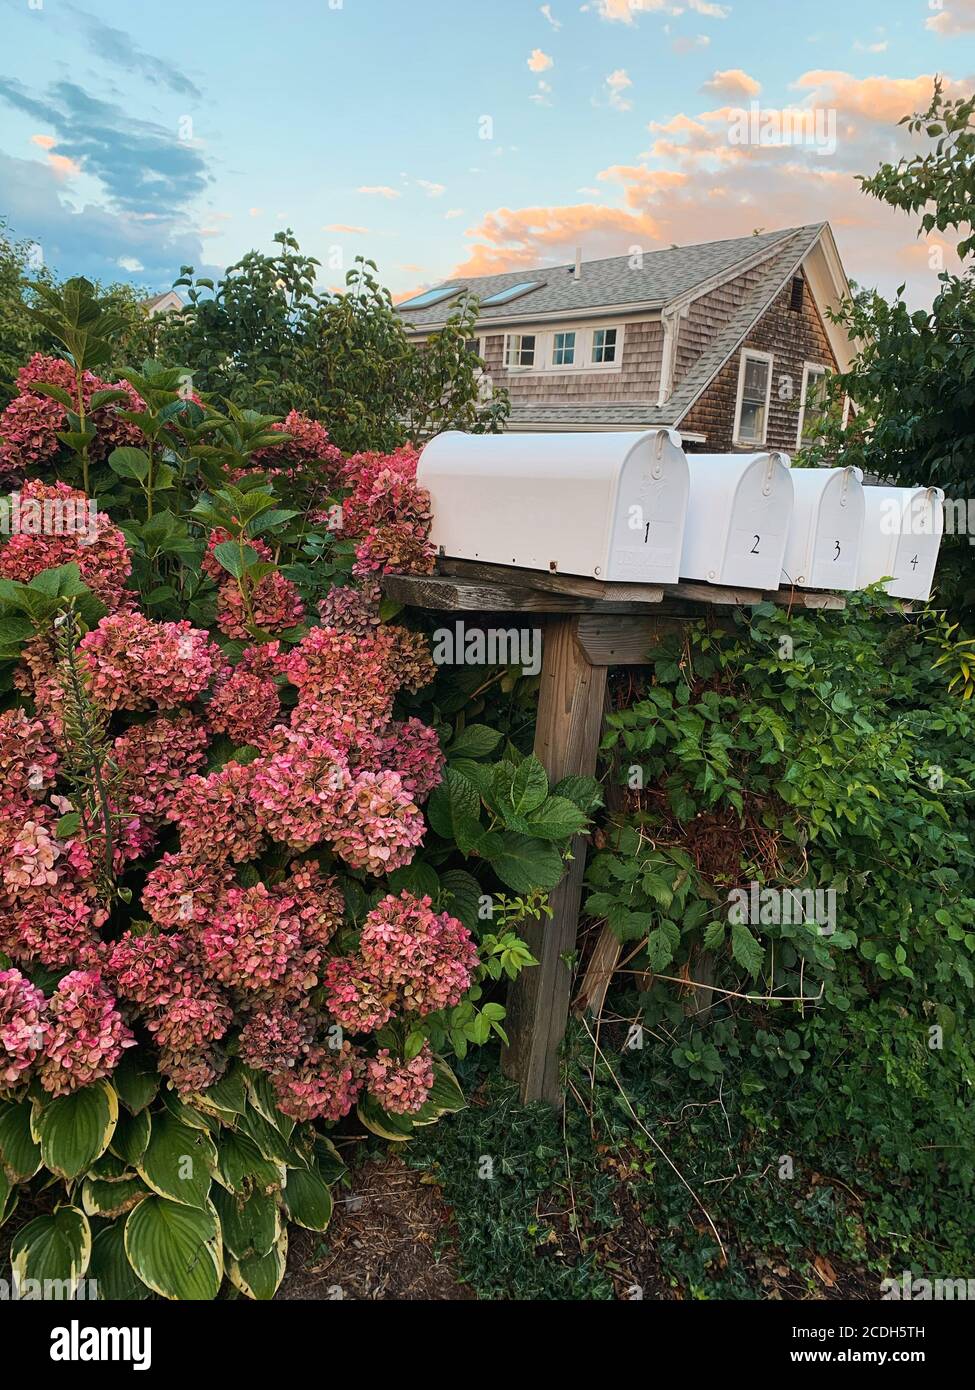 Hydrangeas and Mailboxes in the foreground of a coastal cottage style house Stock Photo